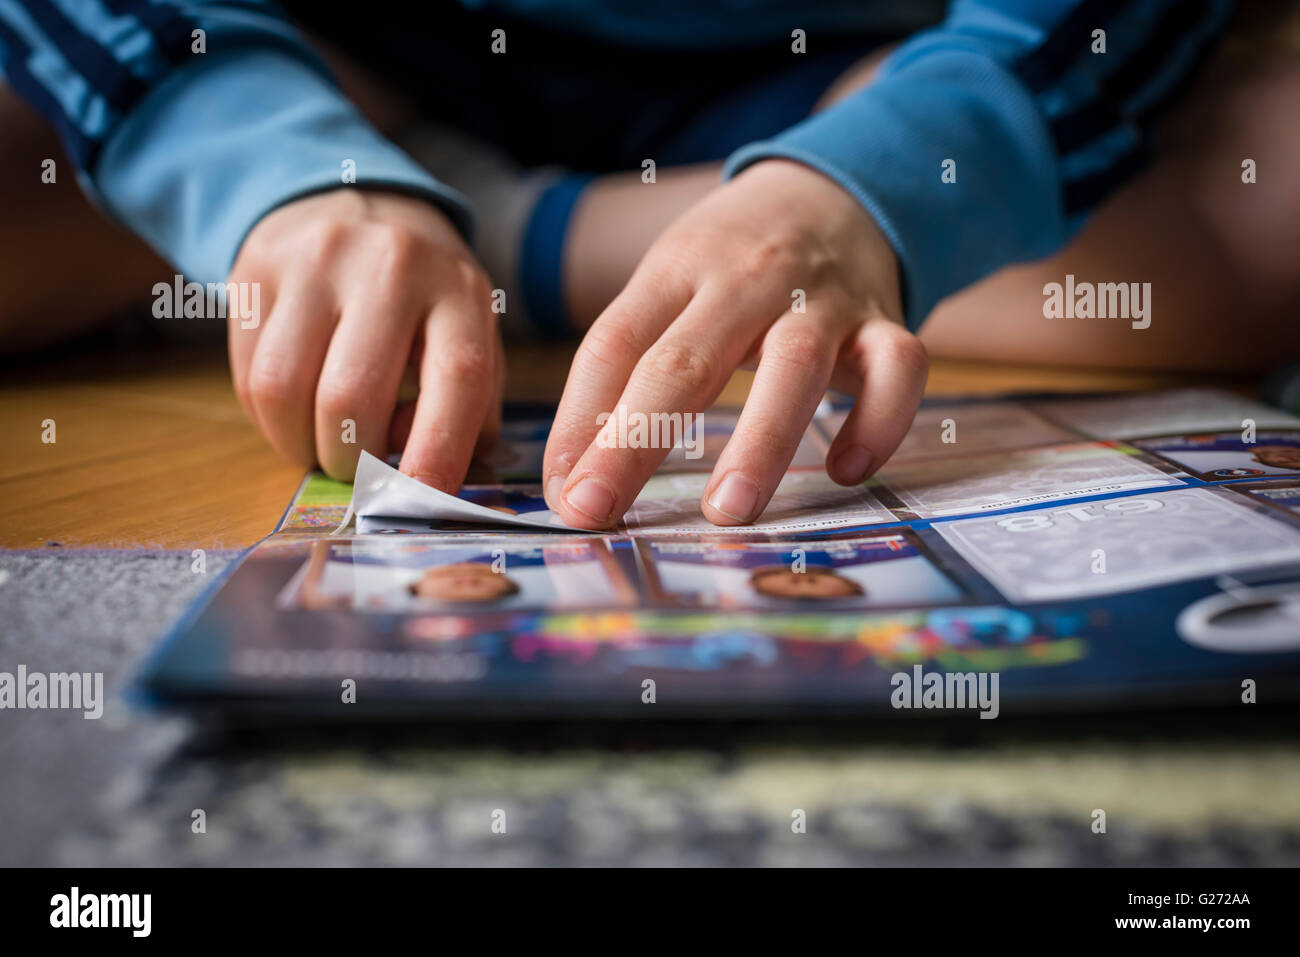 An 8 year old boy is pasting football trading cards into his sticker collection scrapbook. Stock Photo